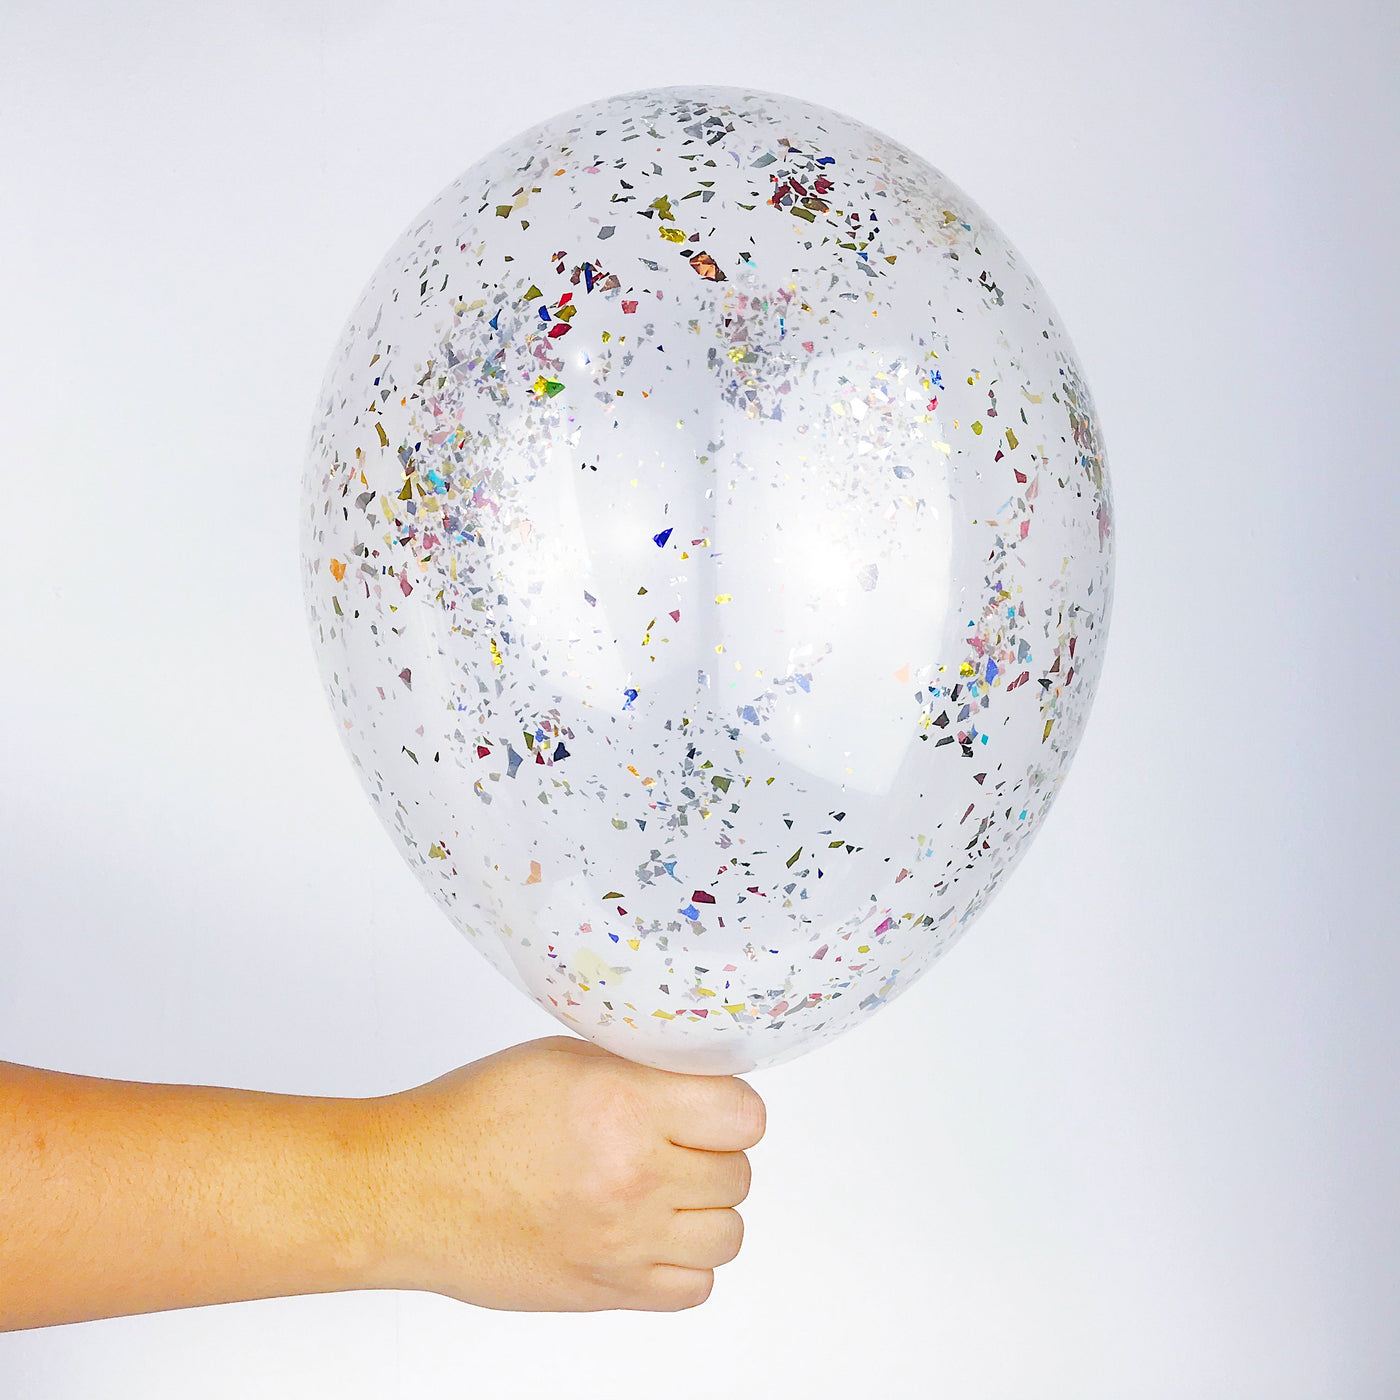 Stardust Confetti Balloon - a clear balloon made of high quality biodegradable latex material filled with finely cut foils in a range of colors